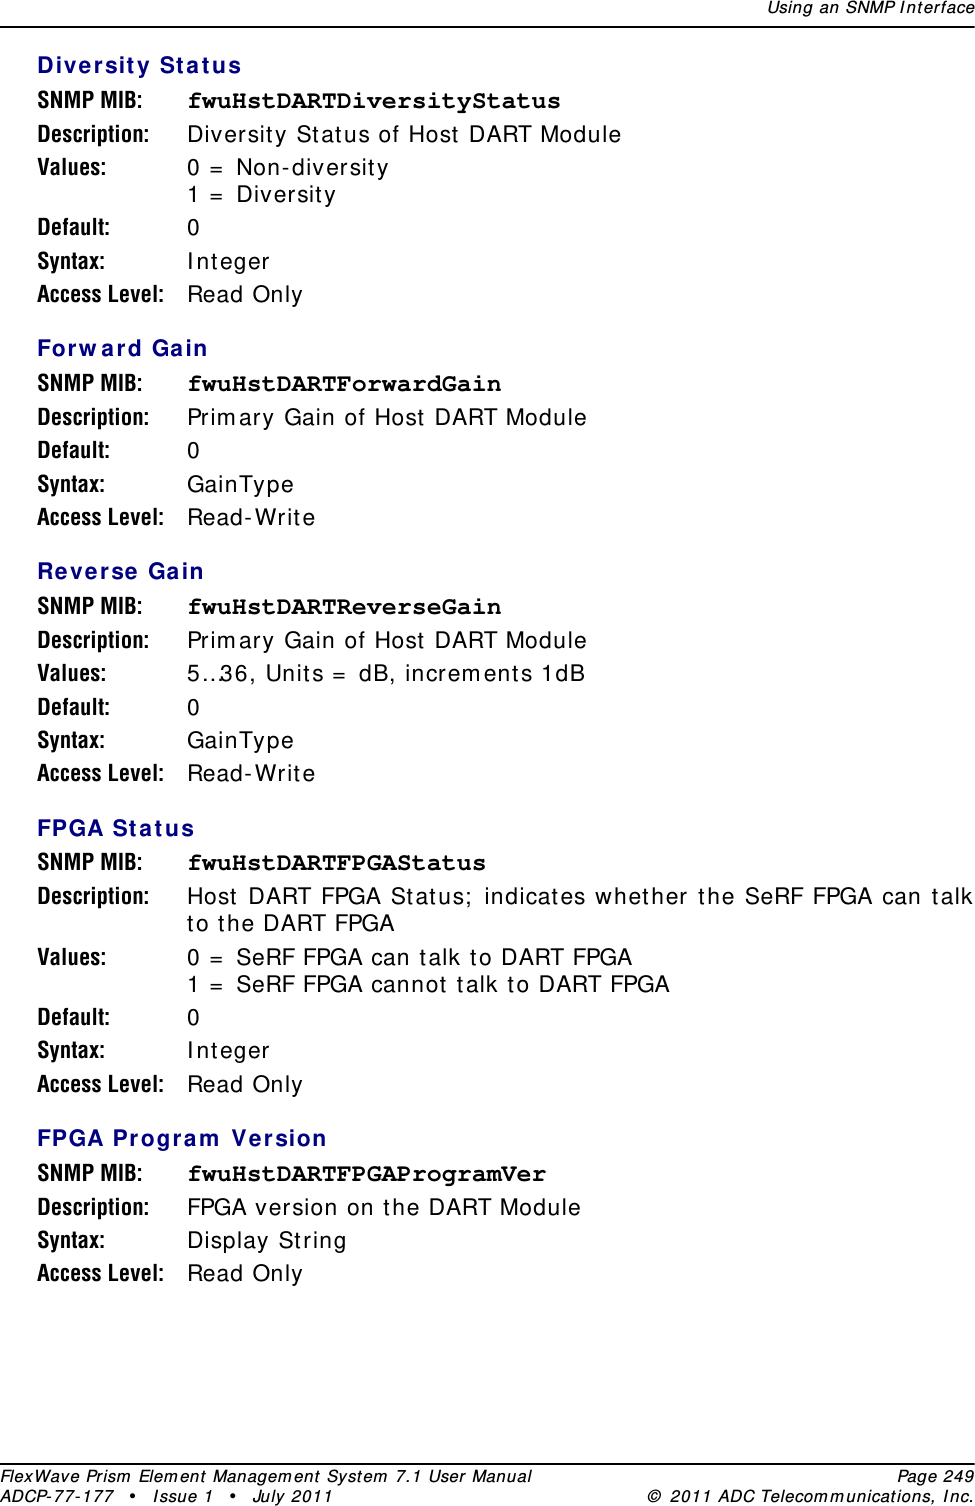 Using an SNMP I nt erfaceFlexWave Prism  Elem ent Managem ent  Syst em  7.1 User Manual Page 249ADCP- 77- 177  • I ssue 1 • July 2011 ©  2011 ADC Telecom m unicat ions, I nc.Diversit y St a t usSNMP MIB: fwuHstDARTDiversityStatusDescription: Diversit y St atus of Host  DART ModuleValues: 0 =  Non- diversit y1 =  Diversit yDefault: 0Syntax: I ntegerAccess Level: Read OnlyForw ard GainSNMP MIB: fwuHstDARTForwardGainDescription: Prim ary Gain of Host  DART Module Default: 0Syntax: GainTypeAccess Level: Read- Writ eReverse GainSNMP MIB: fwuHstDARTReverseGainDescription: Prim ary Gain of Host  DART ModuleValues: 5…36, Unit s =  dB, increm ents 1dBDefault: 0Syntax: GainTypeAccess Level: Read- Writ eFPGA St atusSNMP MIB: fwuHstDARTFPGAStatusDescription: Host DART FPGA St at us;  indicat es whet her the SeRF FPGA can talk to t he DART FPGAValues: 0 =  SeRF FPGA can talk t o DART FPGA1 =  SeRF FPGA cannot  talk t o DART FPGADefault: 0Syntax: I ntegerAccess Level: Read OnlyFPGA Pr ogram  Ver sionSNMP MIB: fwuHstDARTFPGAProgramVerDescription: FPGA version on t he DART ModuleSyntax: Display StringAccess Level: Read Only